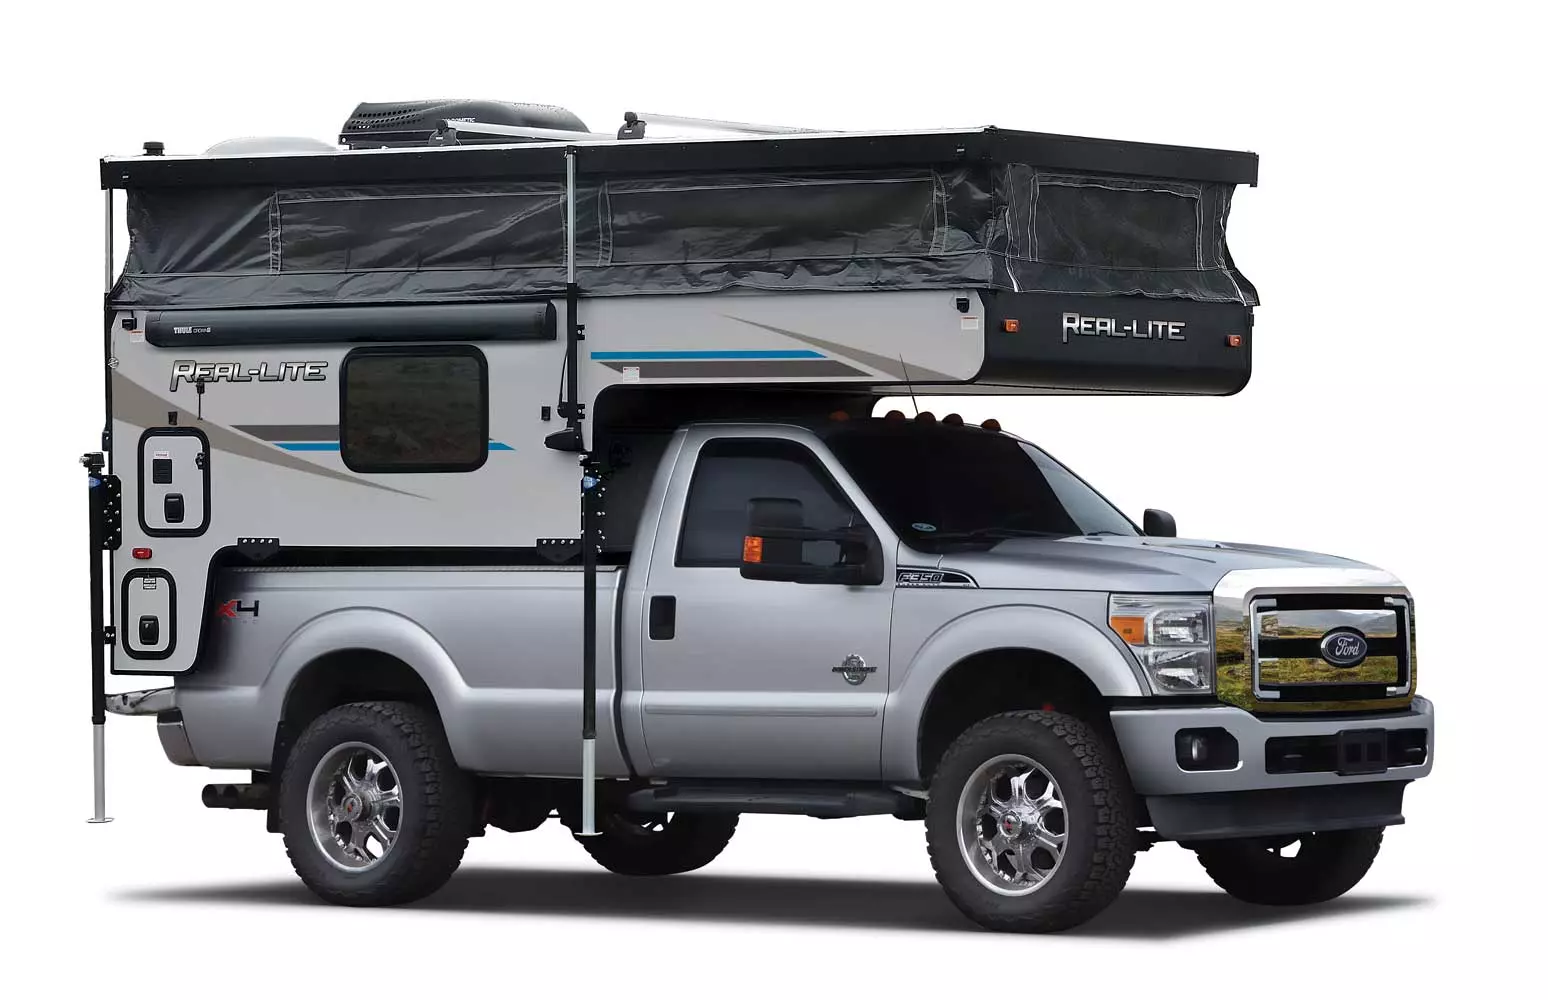 Real-Lite Truck Campers - Palomino RV